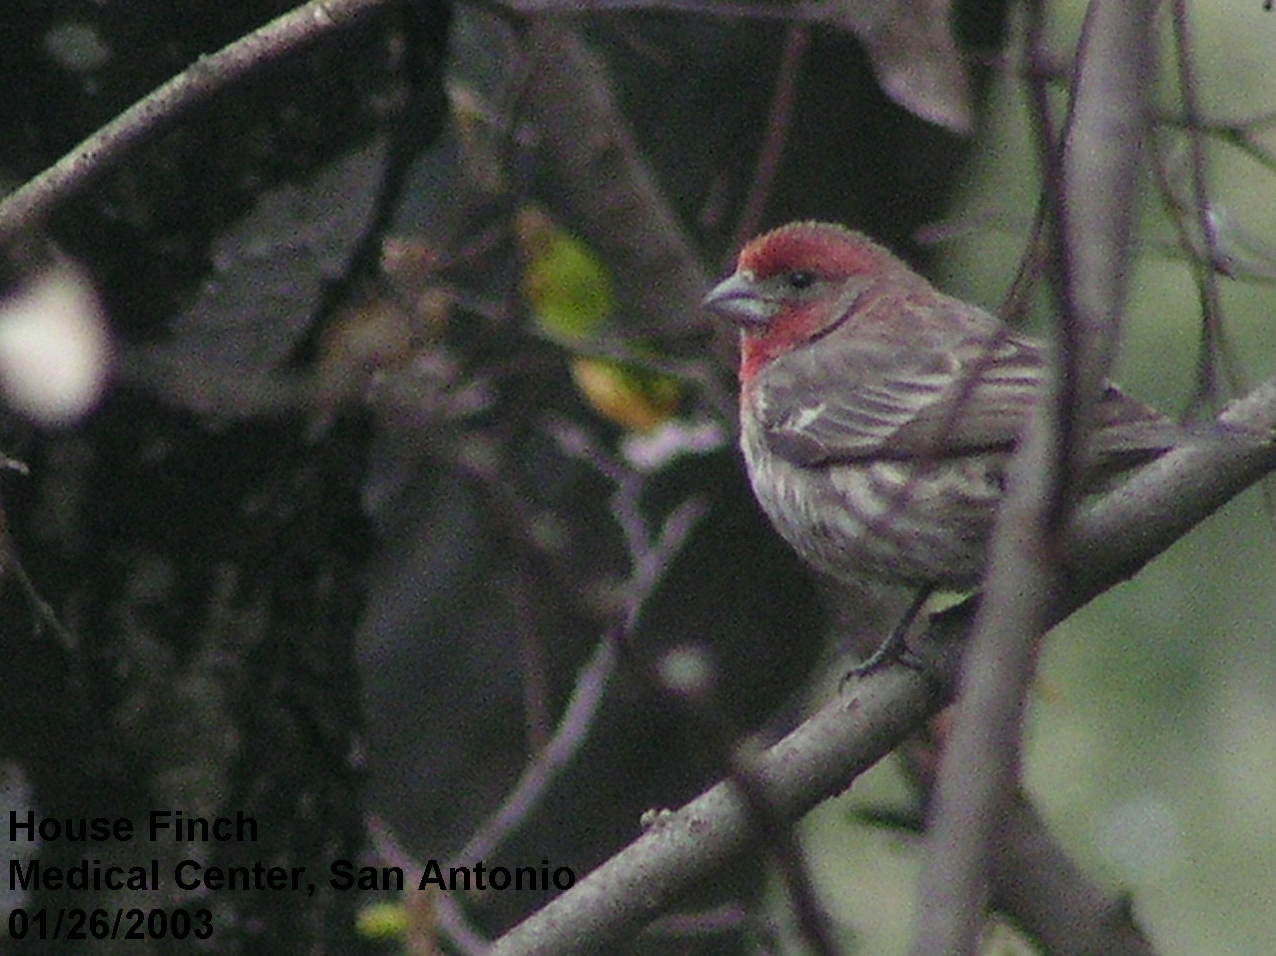 Click picture to see more House Finch Photos.